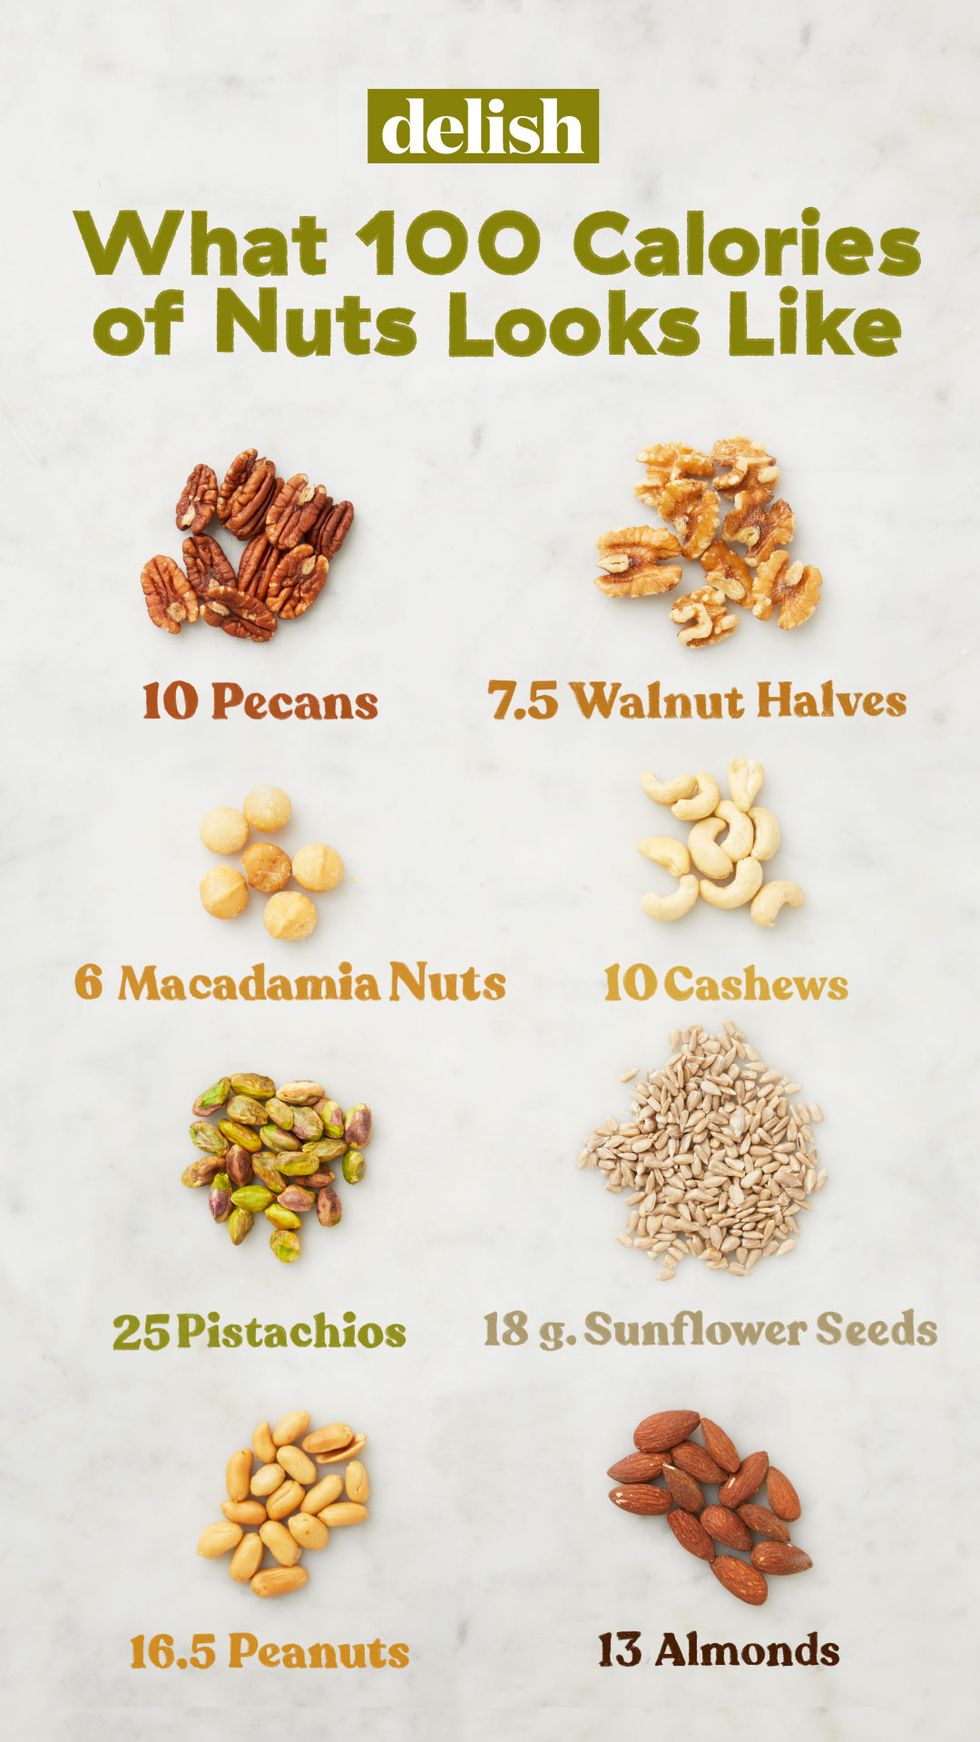 100 Calories of Nuts Looks Like